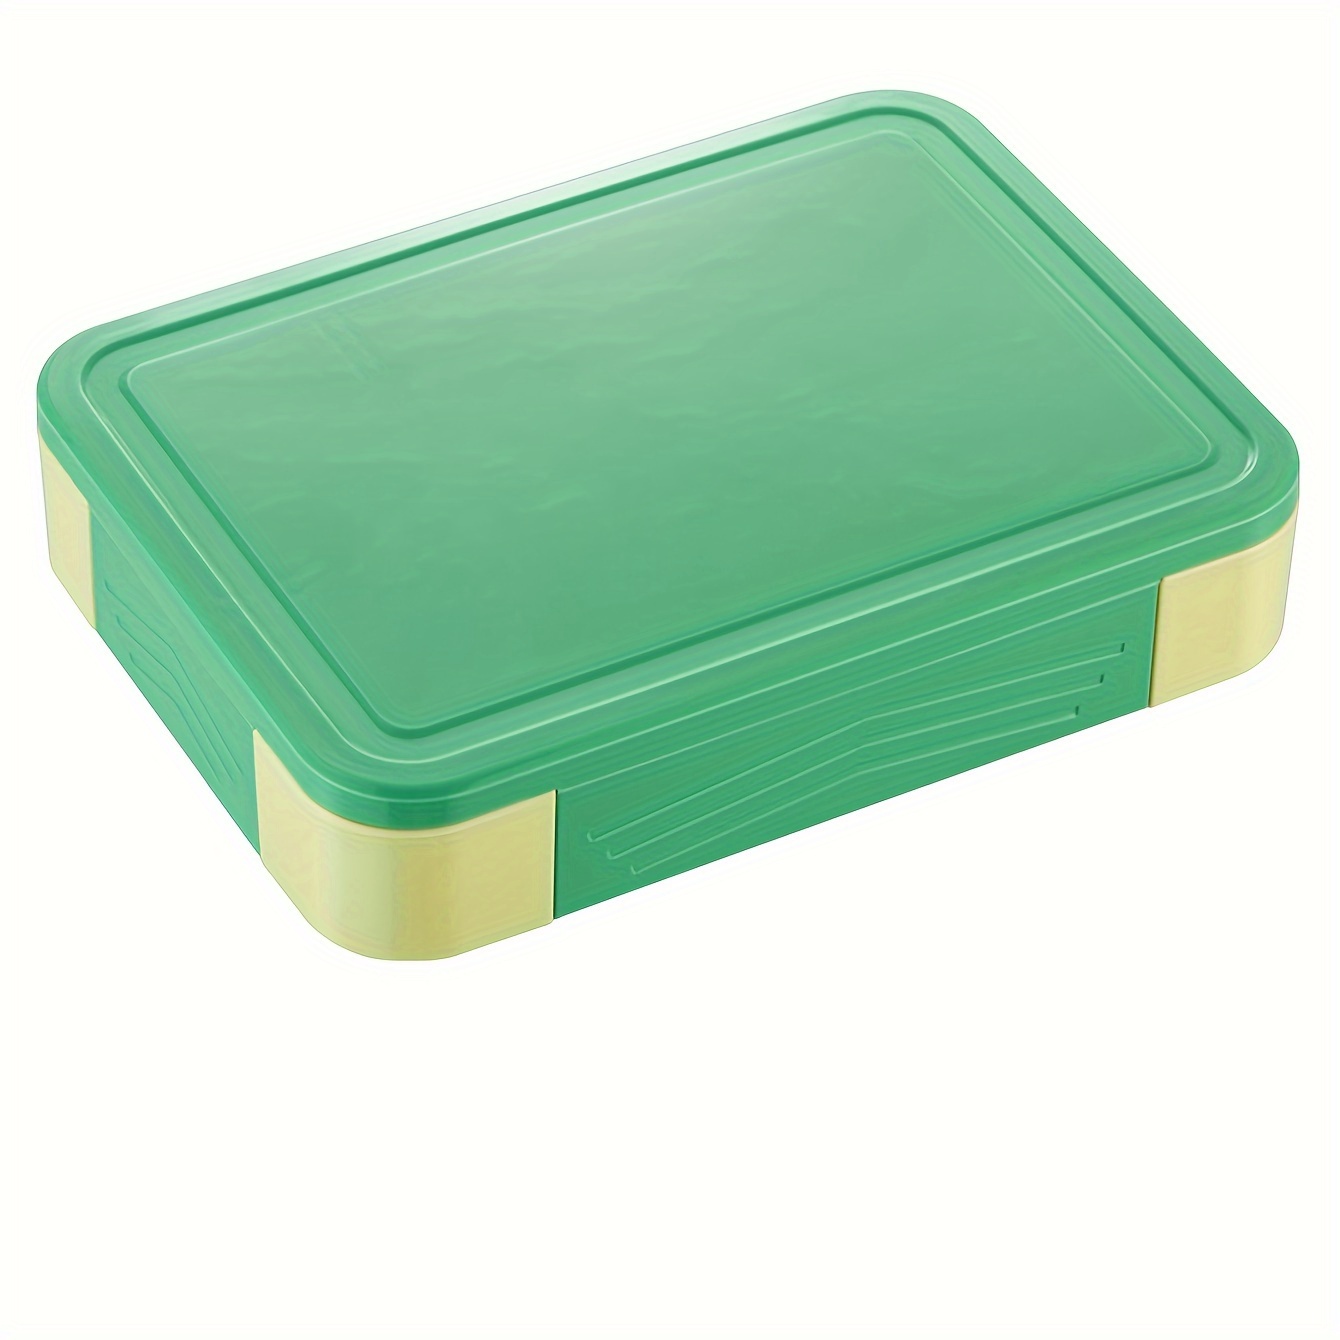 Lunch Box-1330ml Leakproof 6 Compartment Bento Box, Book Style Food  Container With Cutlery, Safe For Microwave, Dishwasher